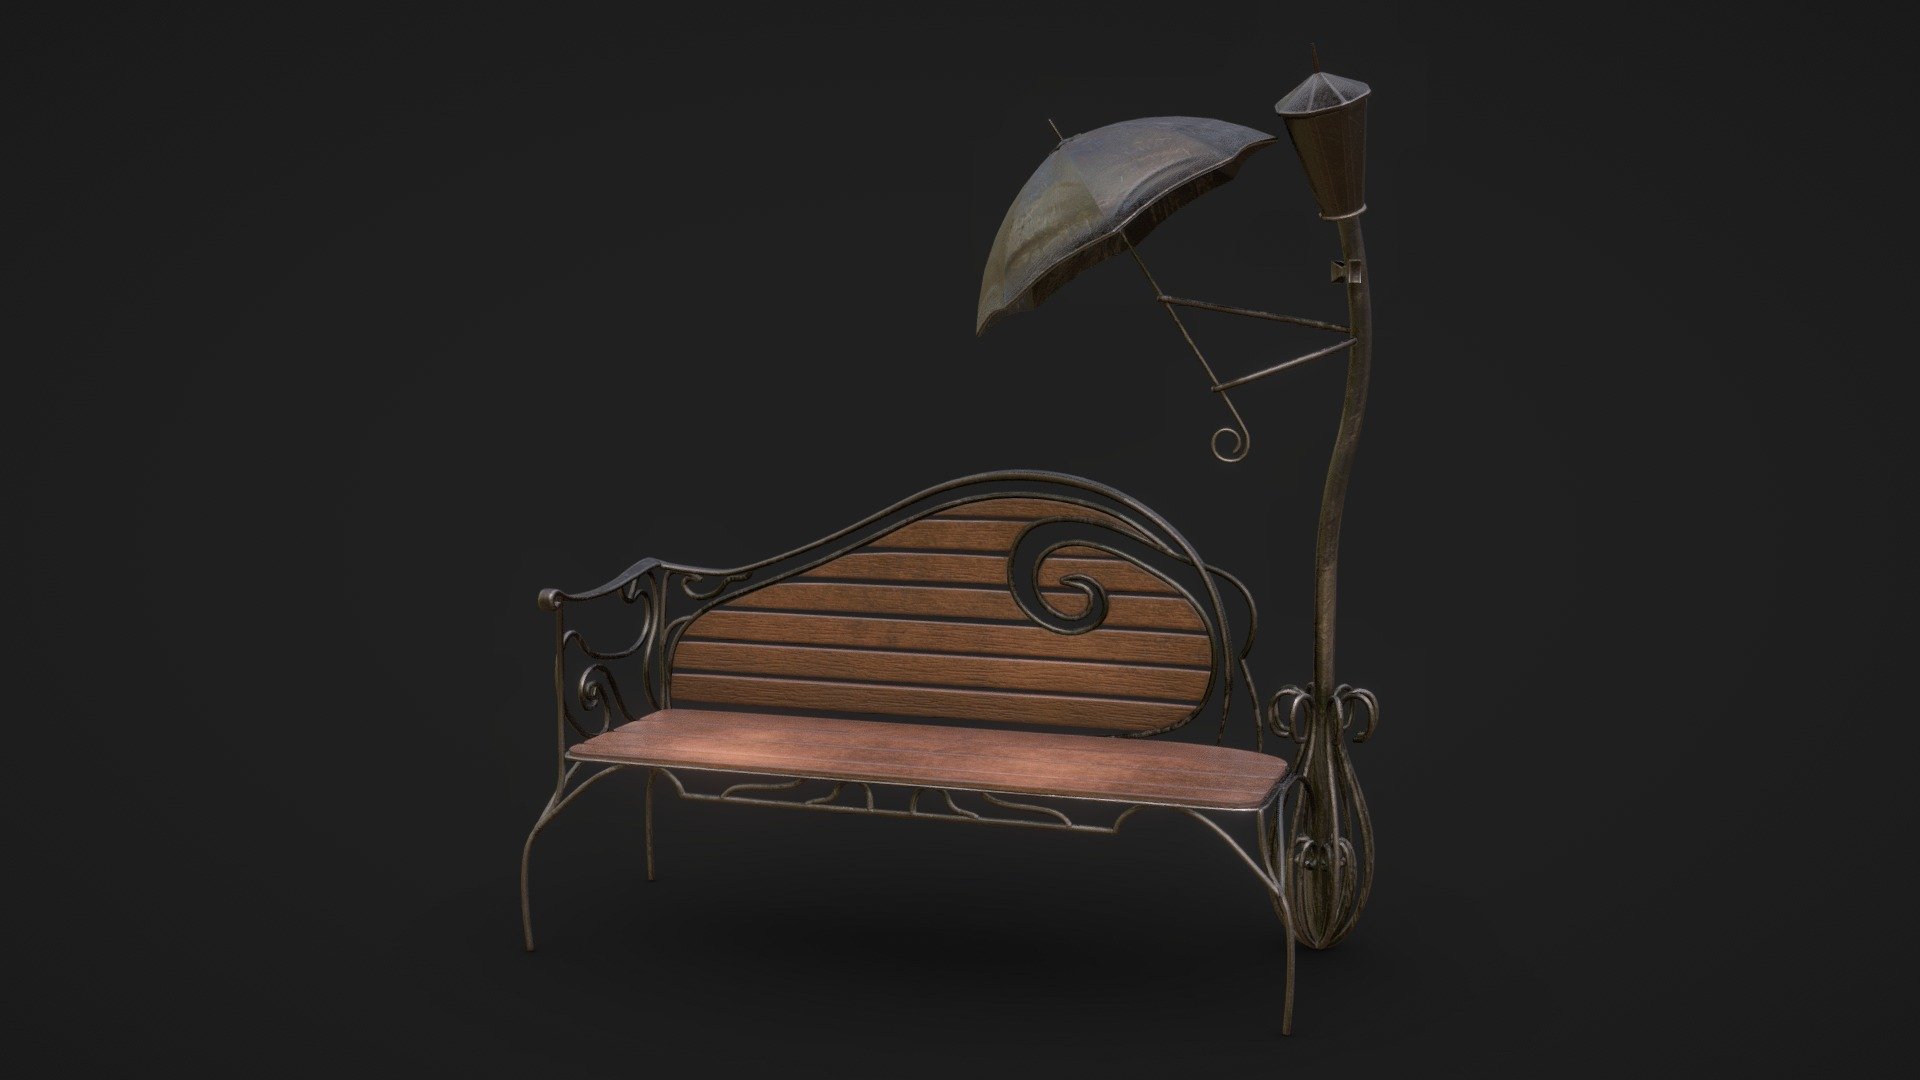 Wooden bench with decorative metal lantern holding an umbrella

Technical specifications:

Optimized model

non-overlapping UV map

ready for animation

PBR textures 4K resolution: Normal, Roughness, Albedo, Metal, displacment maps

Download package includes FBX and OBJ, which are applicable for 3ds Max, Maya, Unreal Engine, Unity, Blender.

Enjoy! - Bench With Decorative Lantern - Buy Royalty Free 3D model by U3DA (@unreal.artists) 3d model